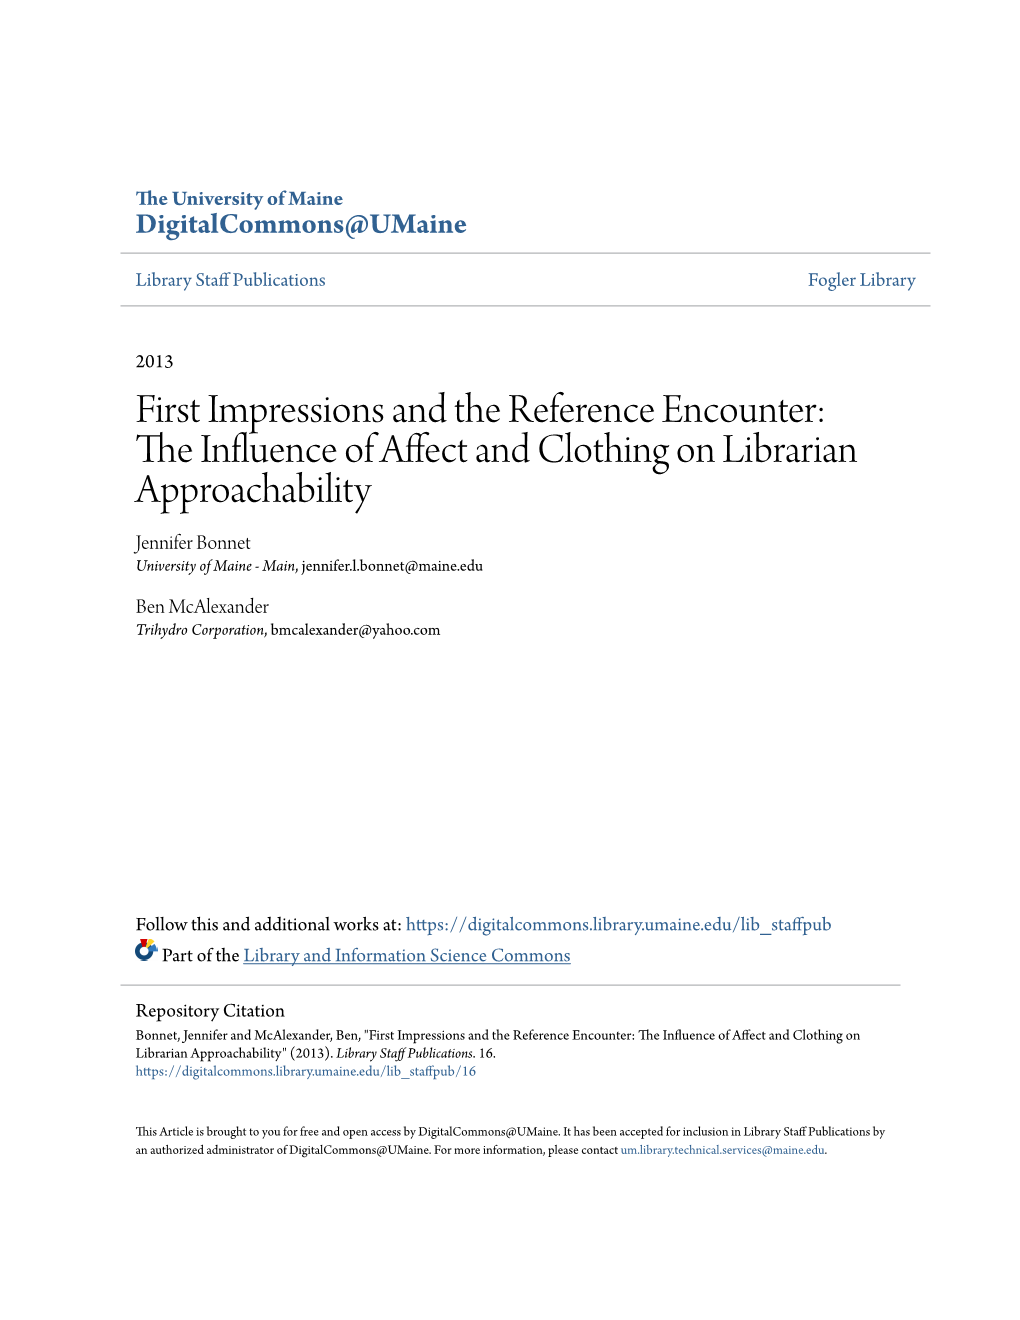 First Impressions and the Reference Encounter: the Influence of Affect and Clothing on Librarian Approachability